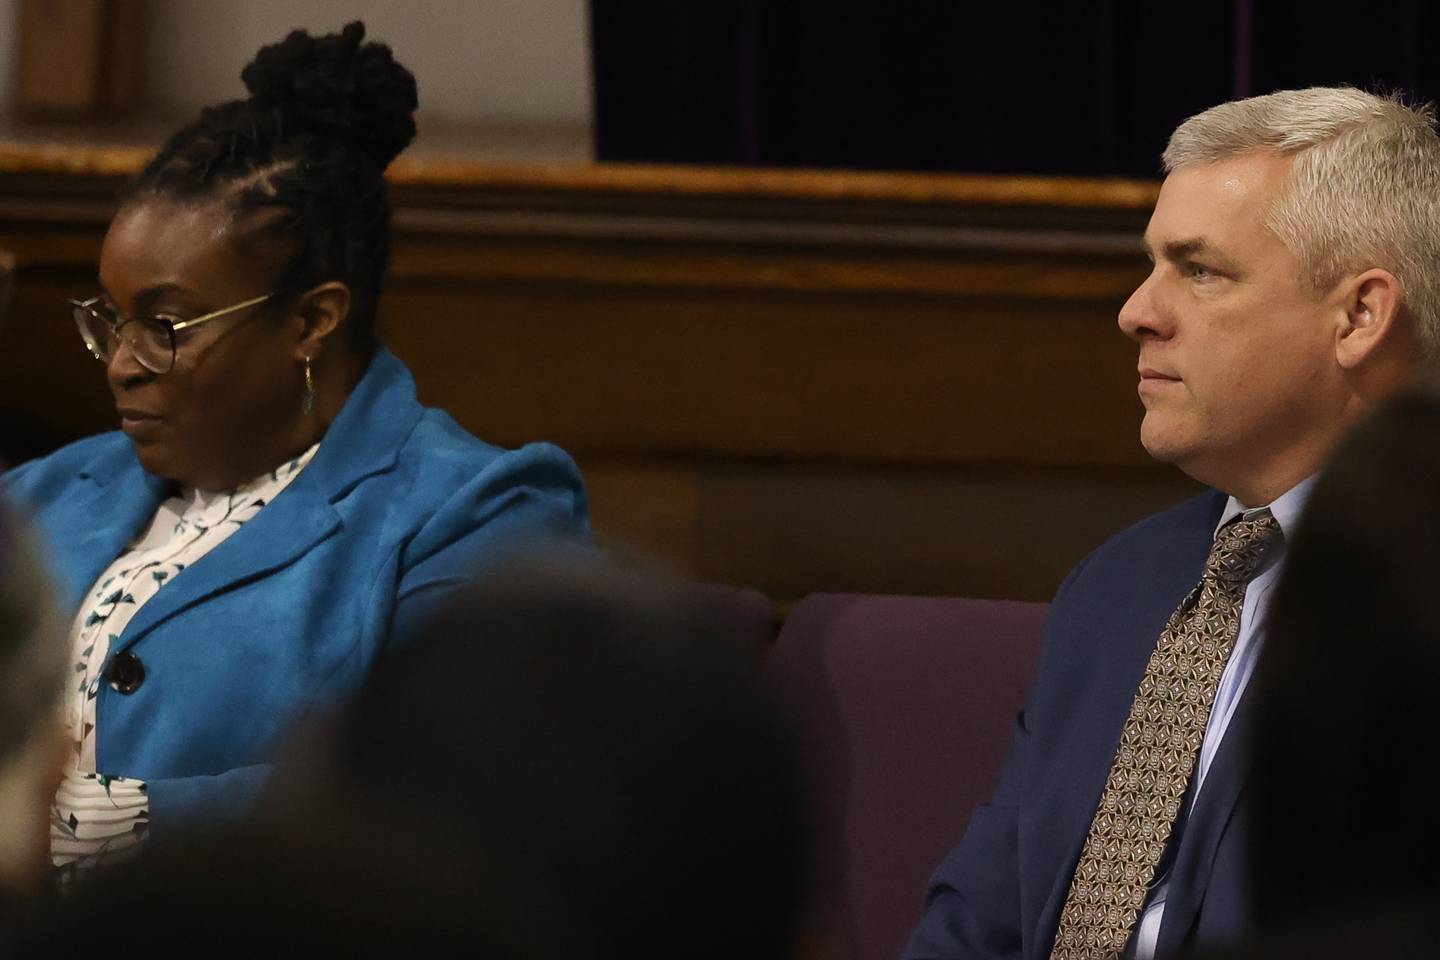 Joliet mayor candidate Terry D’Arcy did not show for a mayoral candidate forum with mayor candidate Tycee Bell (left) and Mayor Bob O’Dekirk at New Canaanland Christian Church in Joliet on Saturday, March 25, 2023 in Joliet.